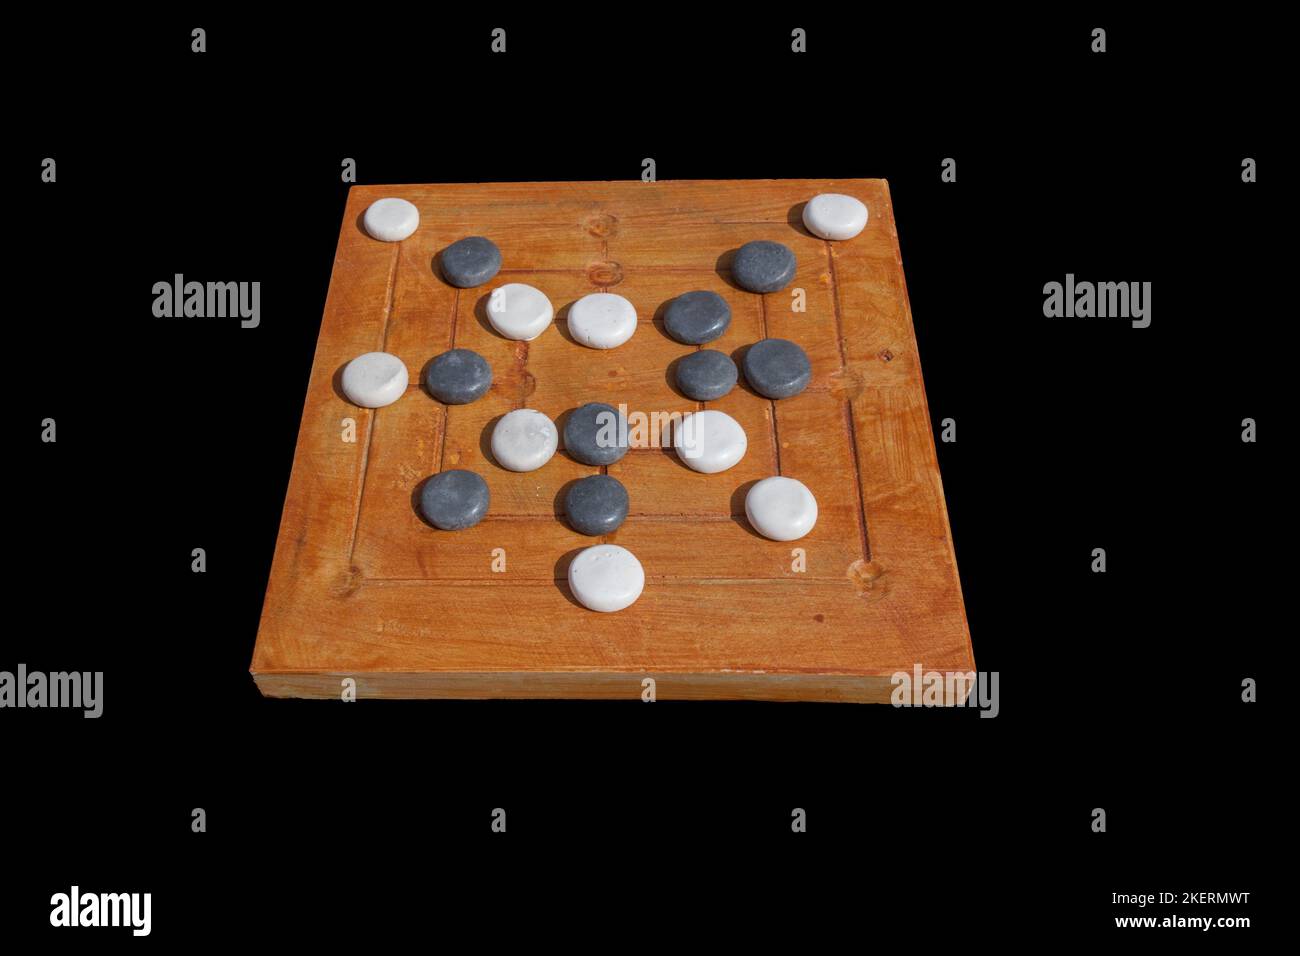 Reconstruction of roman board game Nine mens morris or mill game. Private recreational activity of ancient romans. Stock Photo